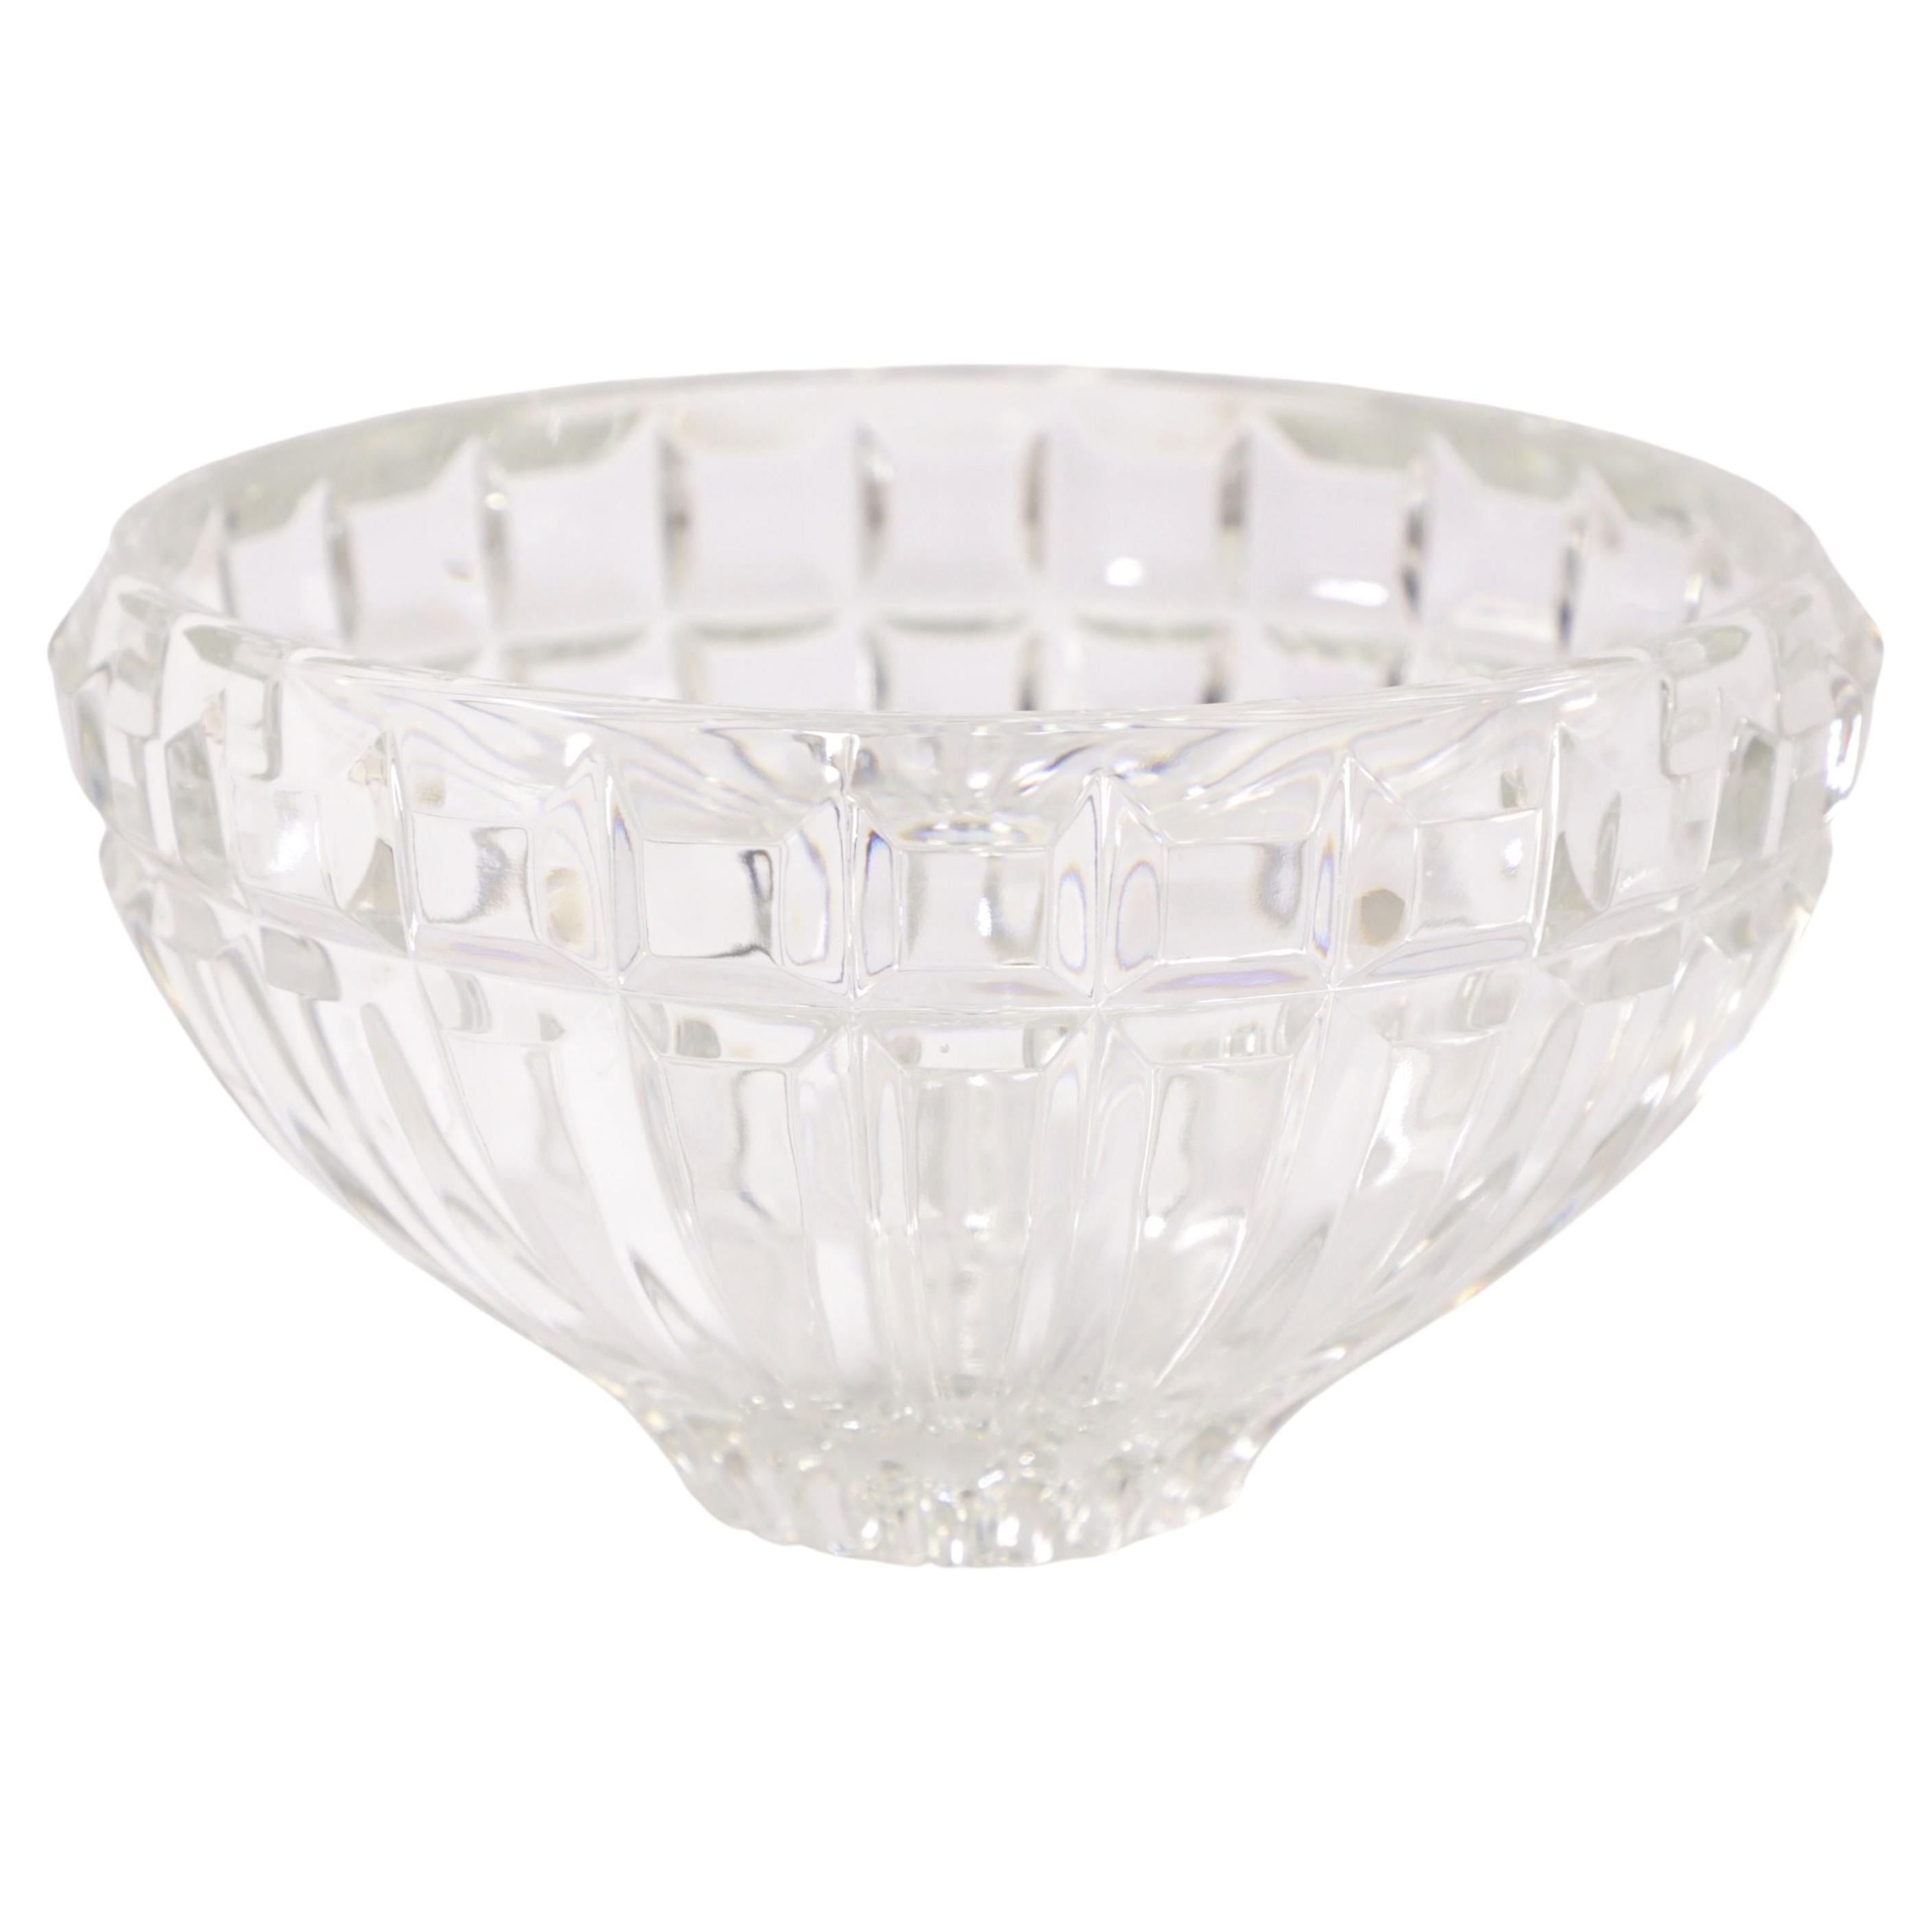 Late 20th Century Crystal Bowl - C For Sale